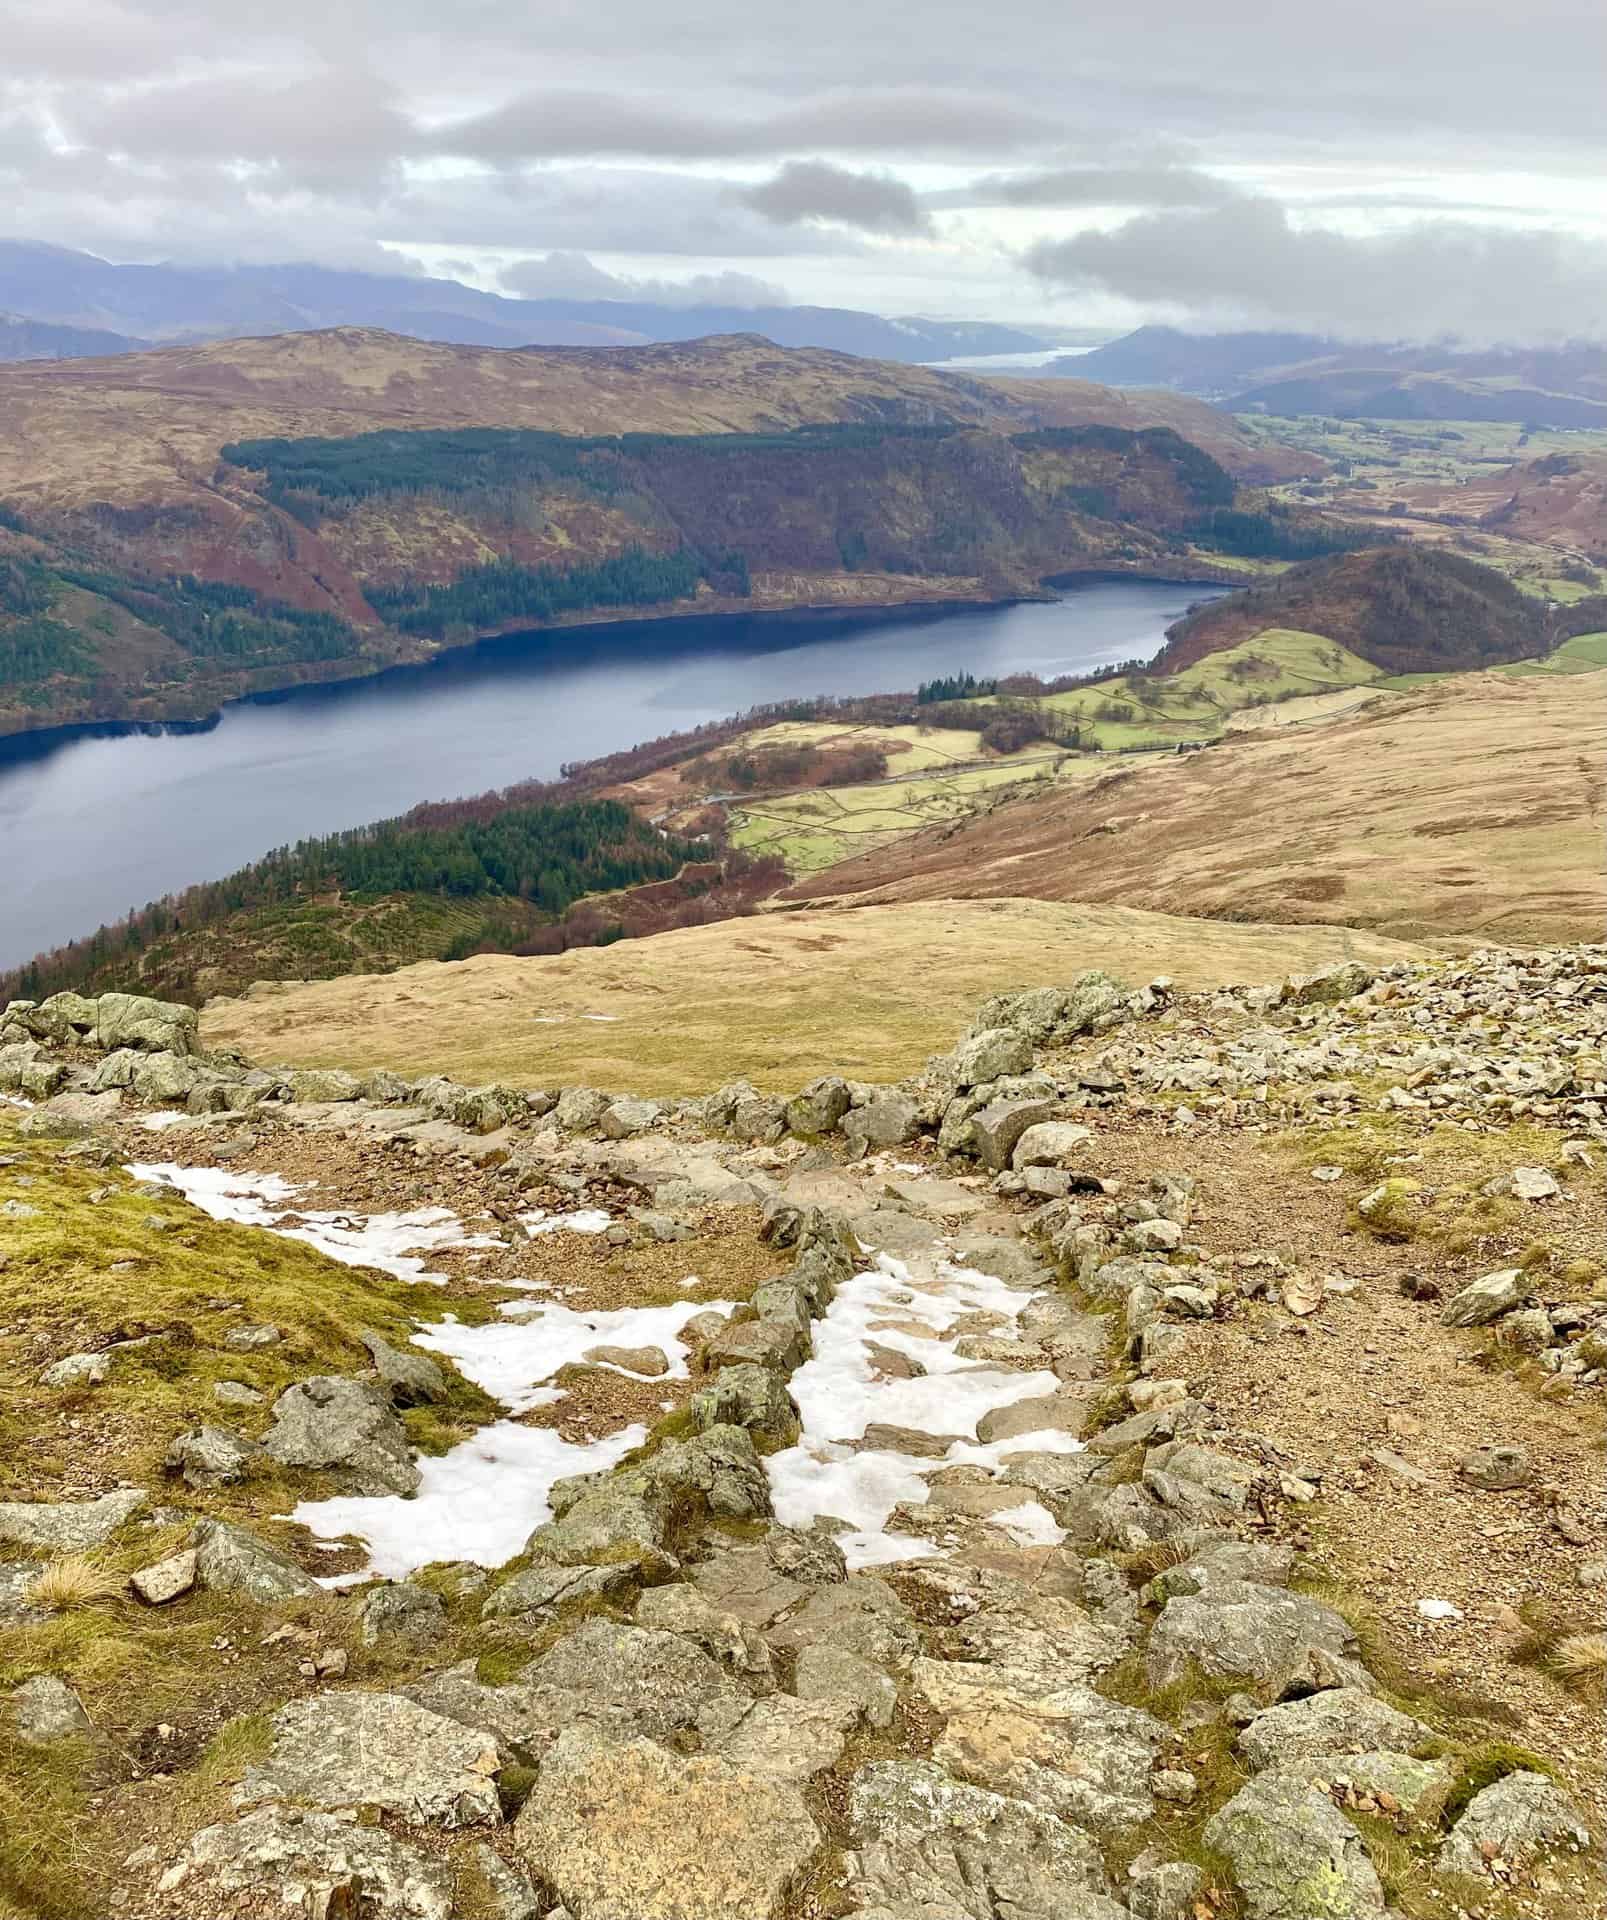 The view of Thirlmere (Reservoir) from the Browncove Crags area. Bassenthwaite Lake is visible in the distance at this point in the Helvellyn walk from Thirlmere.